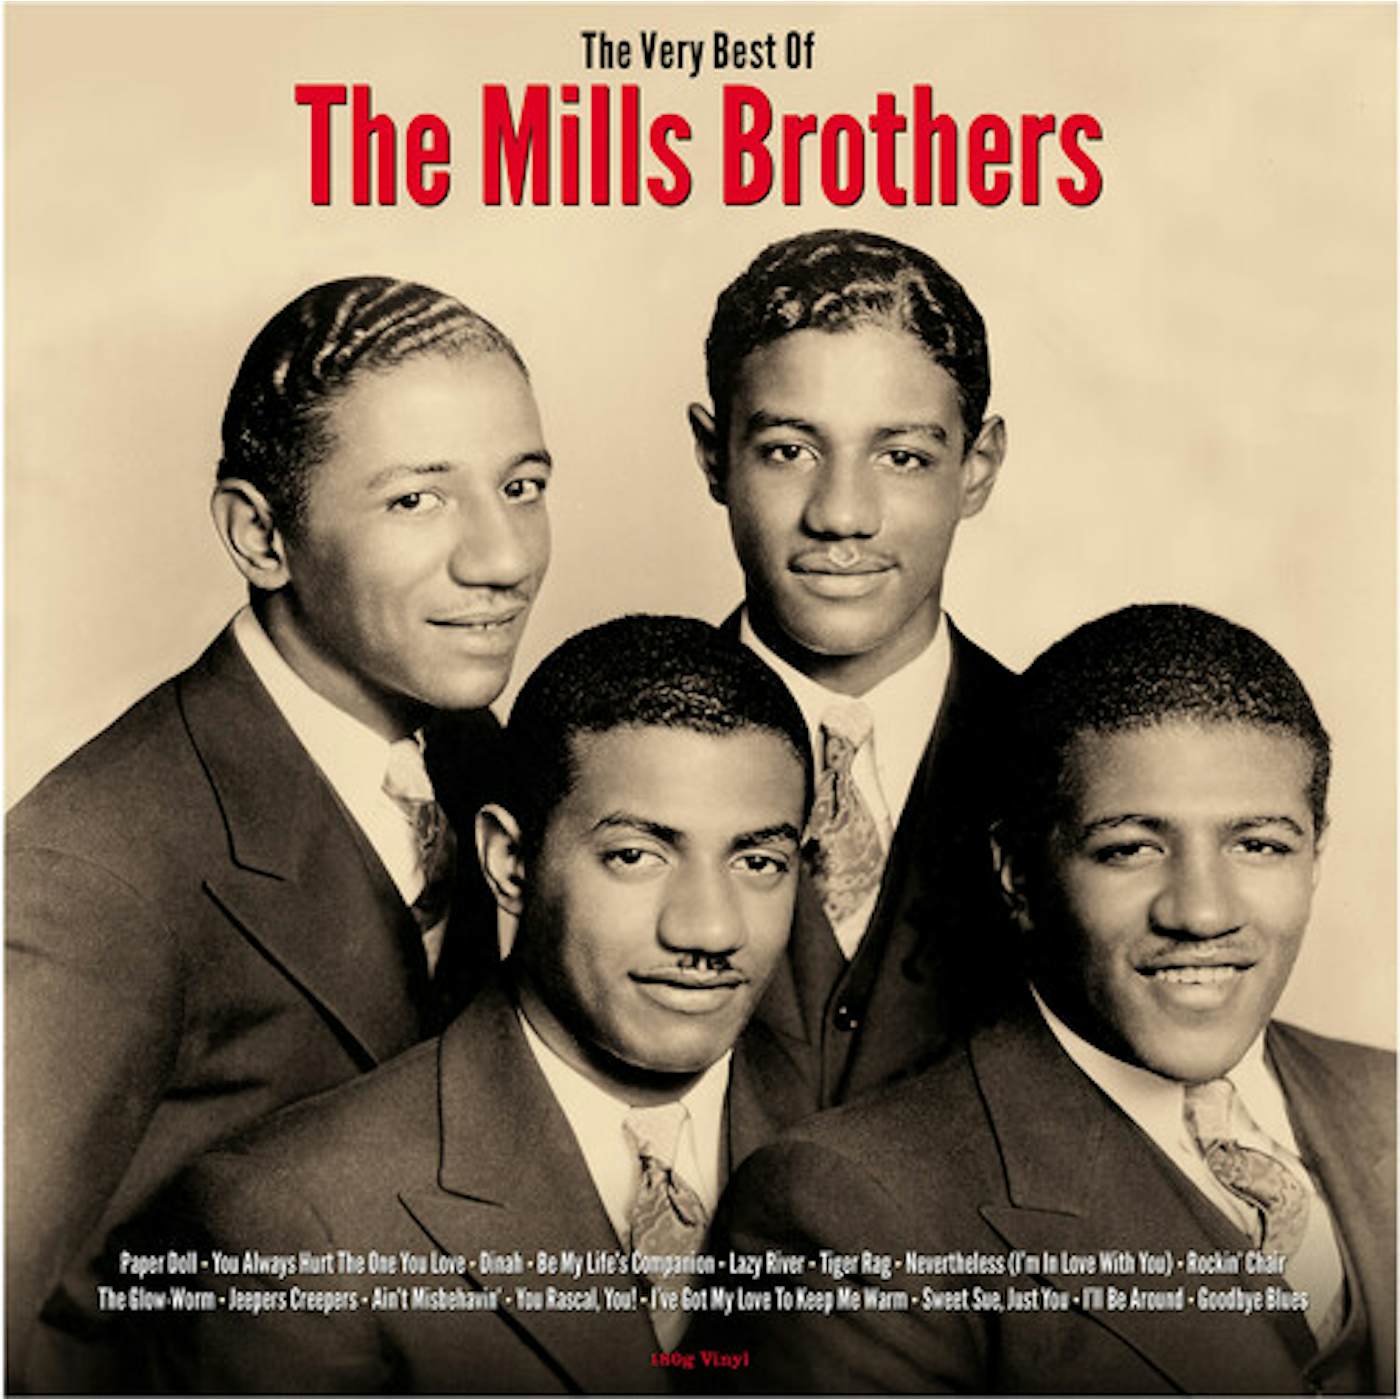 VERY BEST OF THE MILLS BROTHERS Vinyl Record